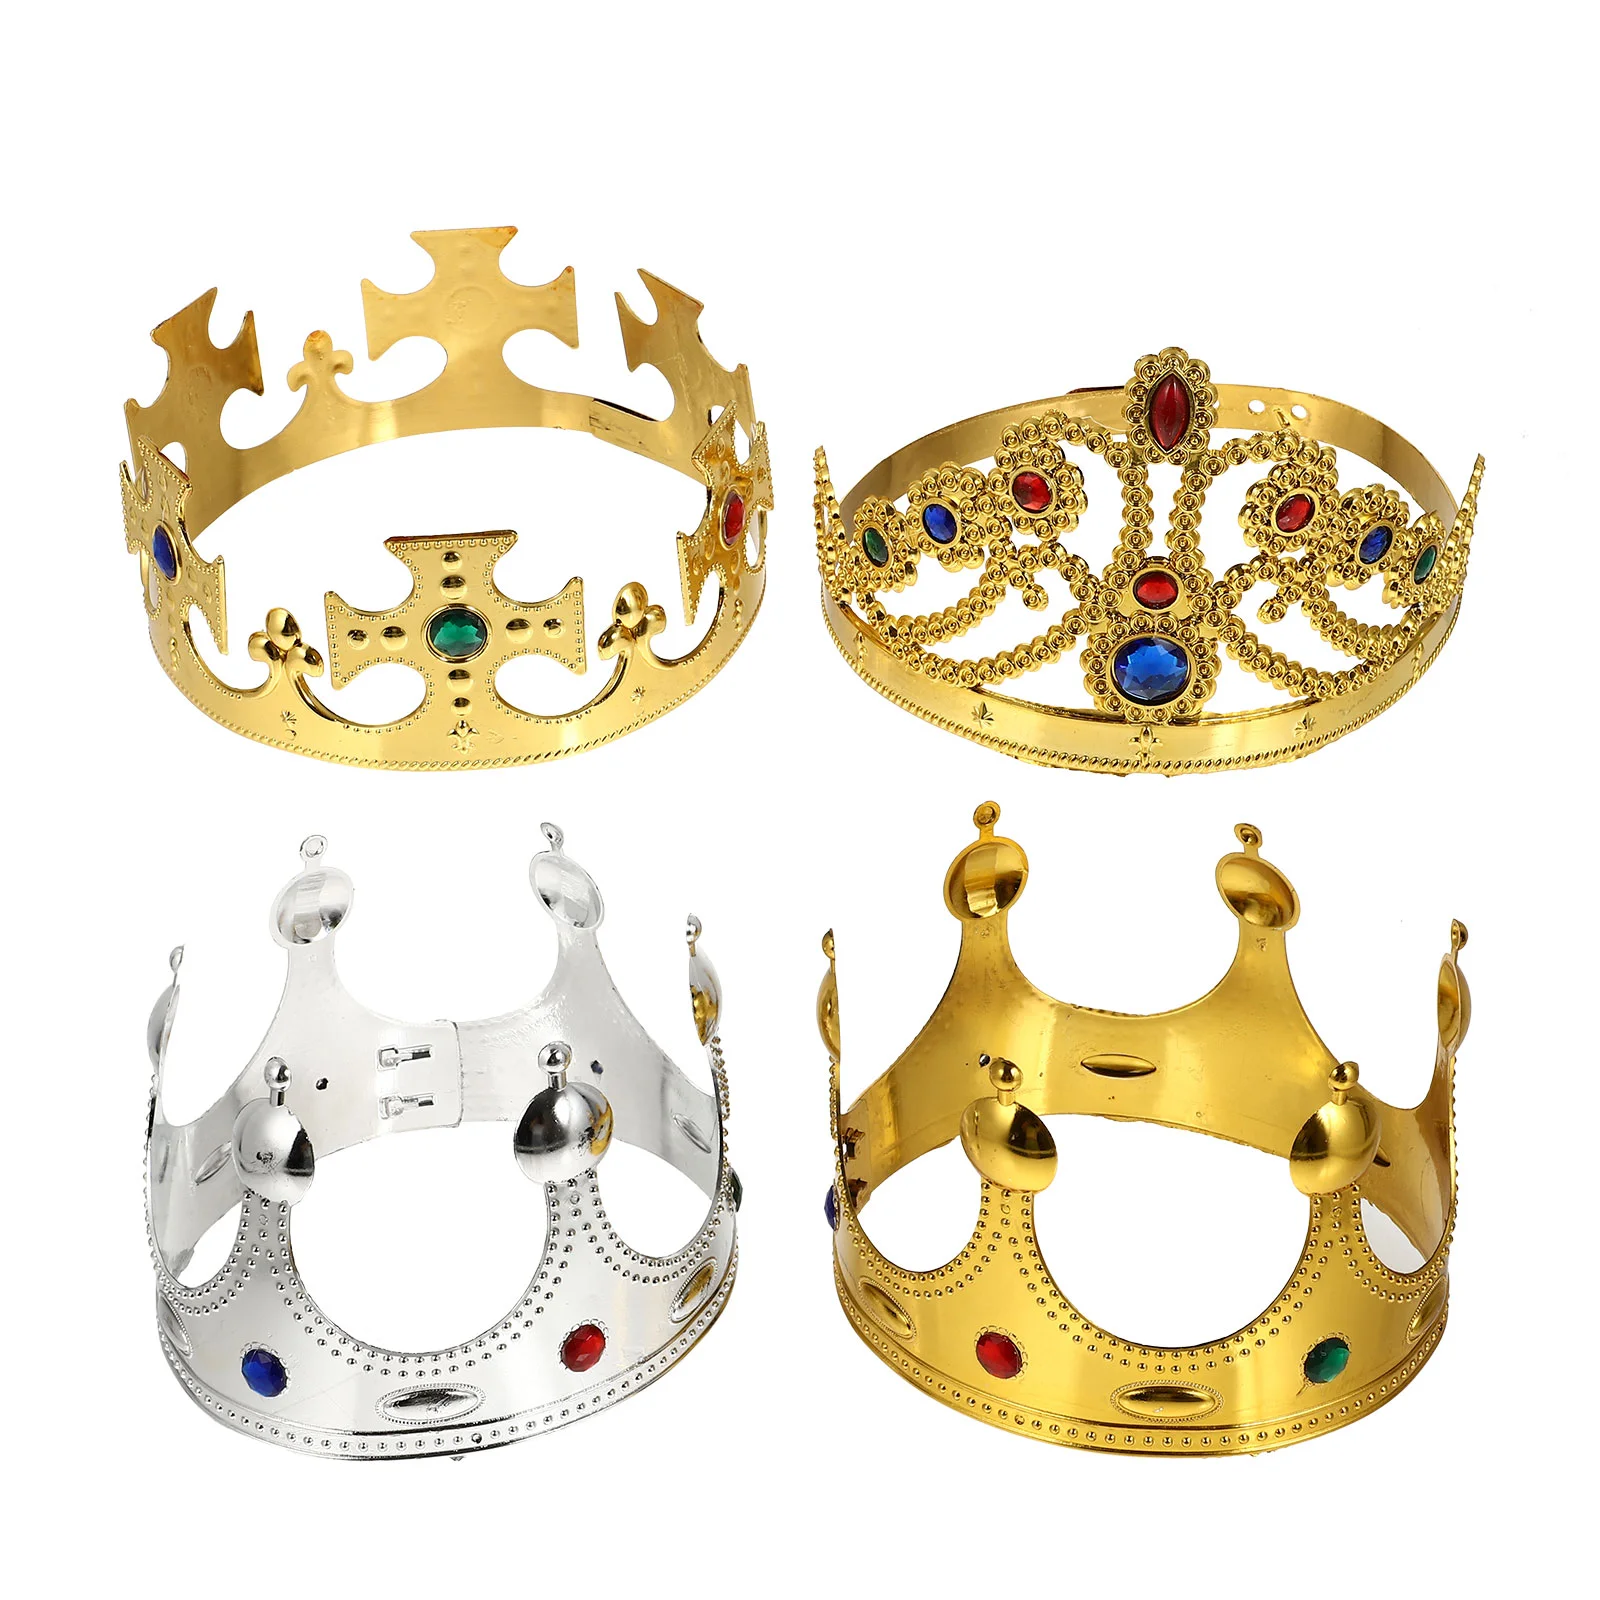 4 Pcs Princess Crown King Prom Gifts Party Crowns Kids Halloween Costume Accessories Tiara Silver Jewelry